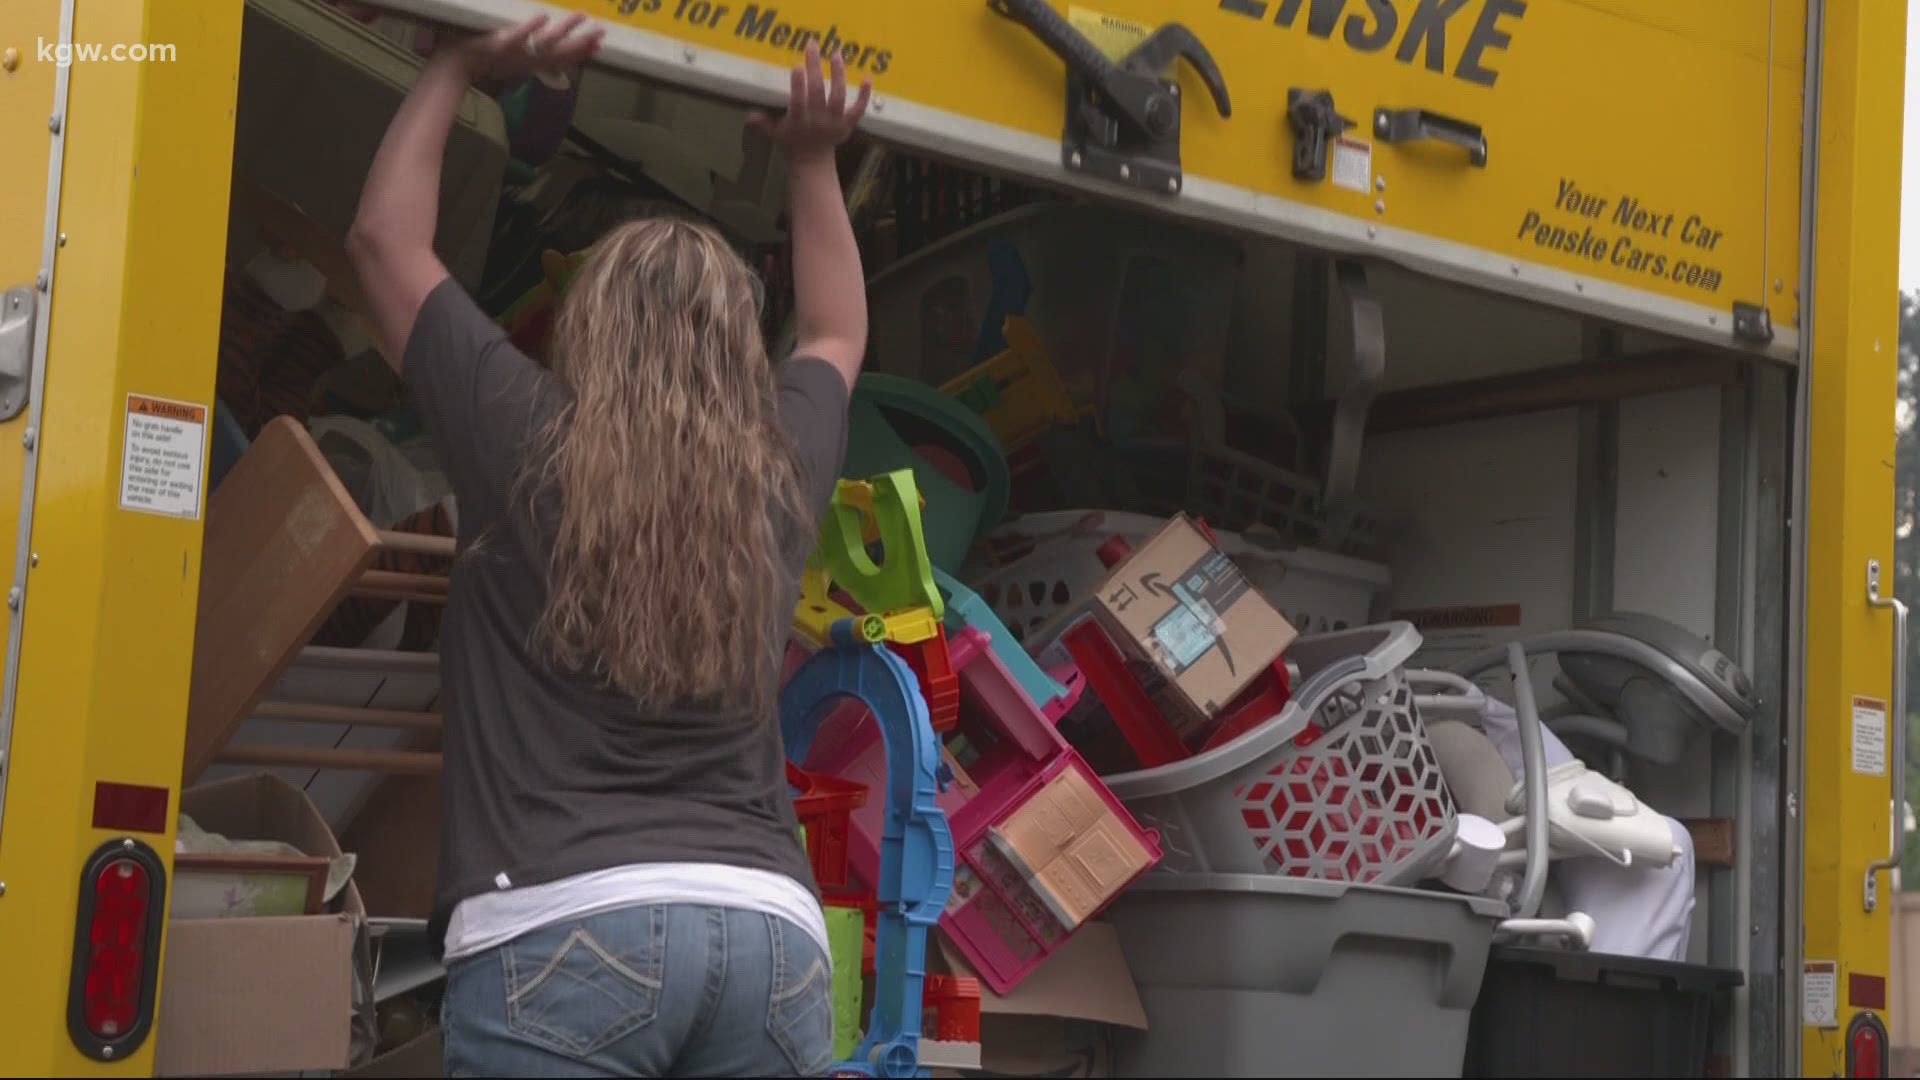 Communities from near and far are pitching in to help victims of the Oregon wildfires. Christine Pitawanich reports.